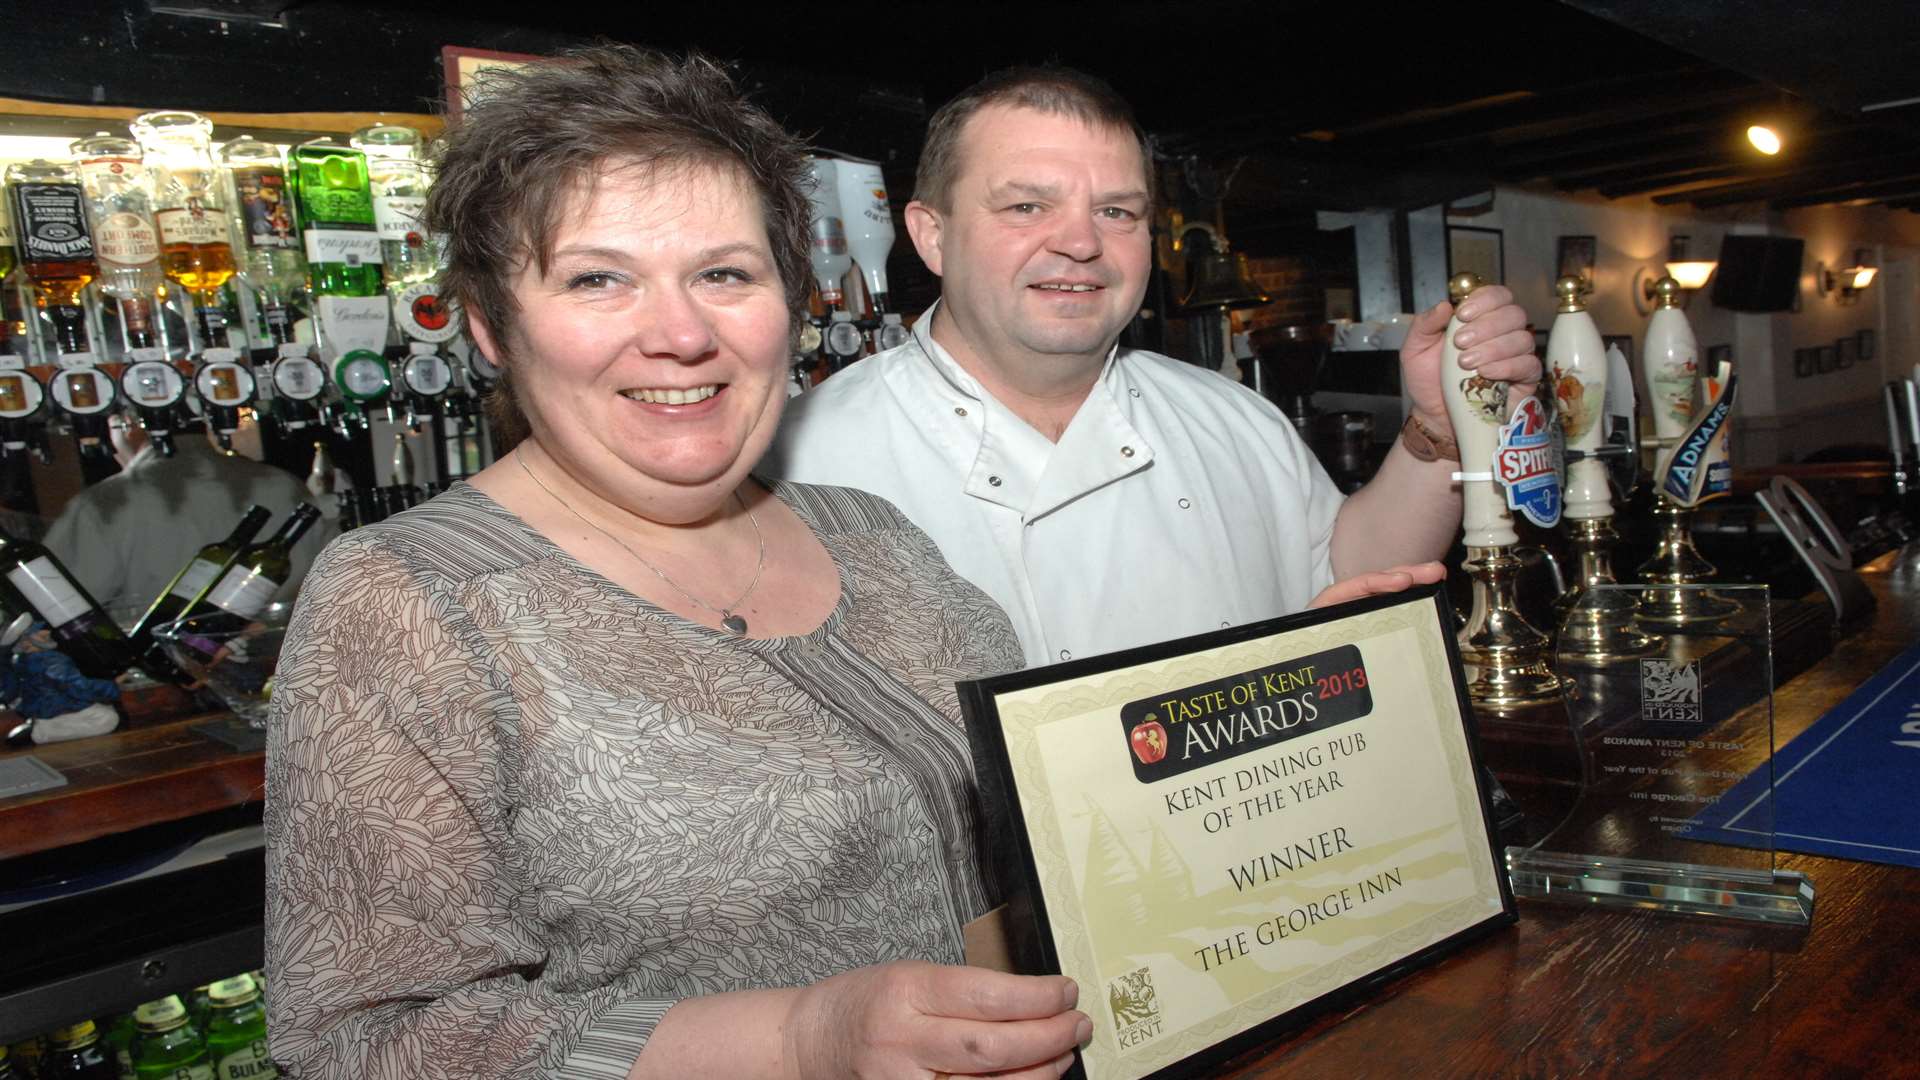 Karen and John Marshall at The George Inn, Molash, after winning Kent Dining Pub of the Year in 2013